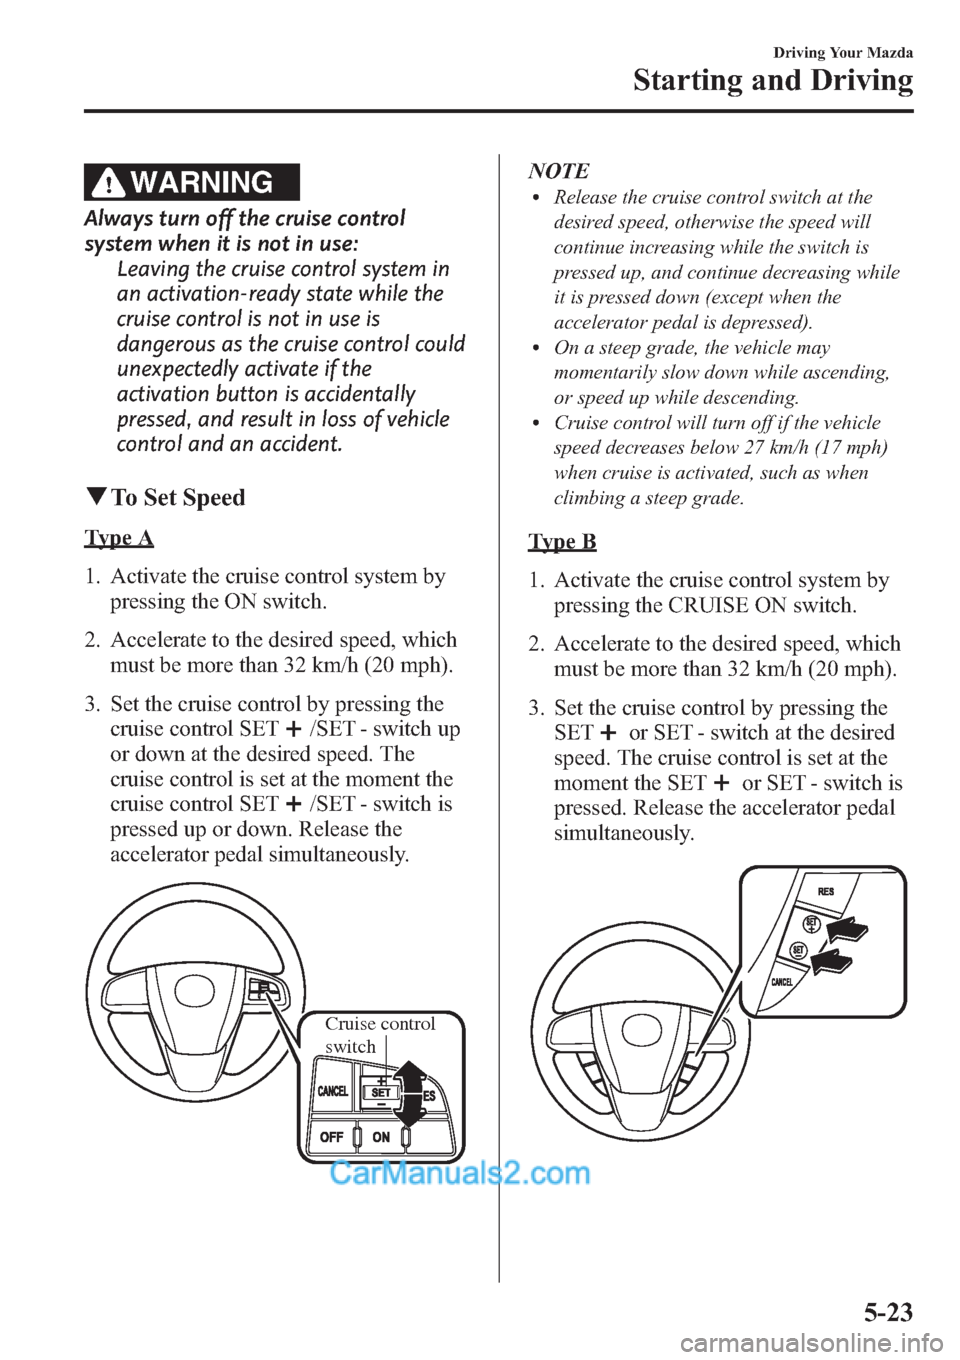 MAZDA MODEL MAZDASPEED 3 2013  Owners Manual (in English) WARNING
Always turn off the cruise control
system when it is not in use:
Leaving the cruise control system in
an activation-ready state while the
cruise control is not in use is
dangerous as the cruis